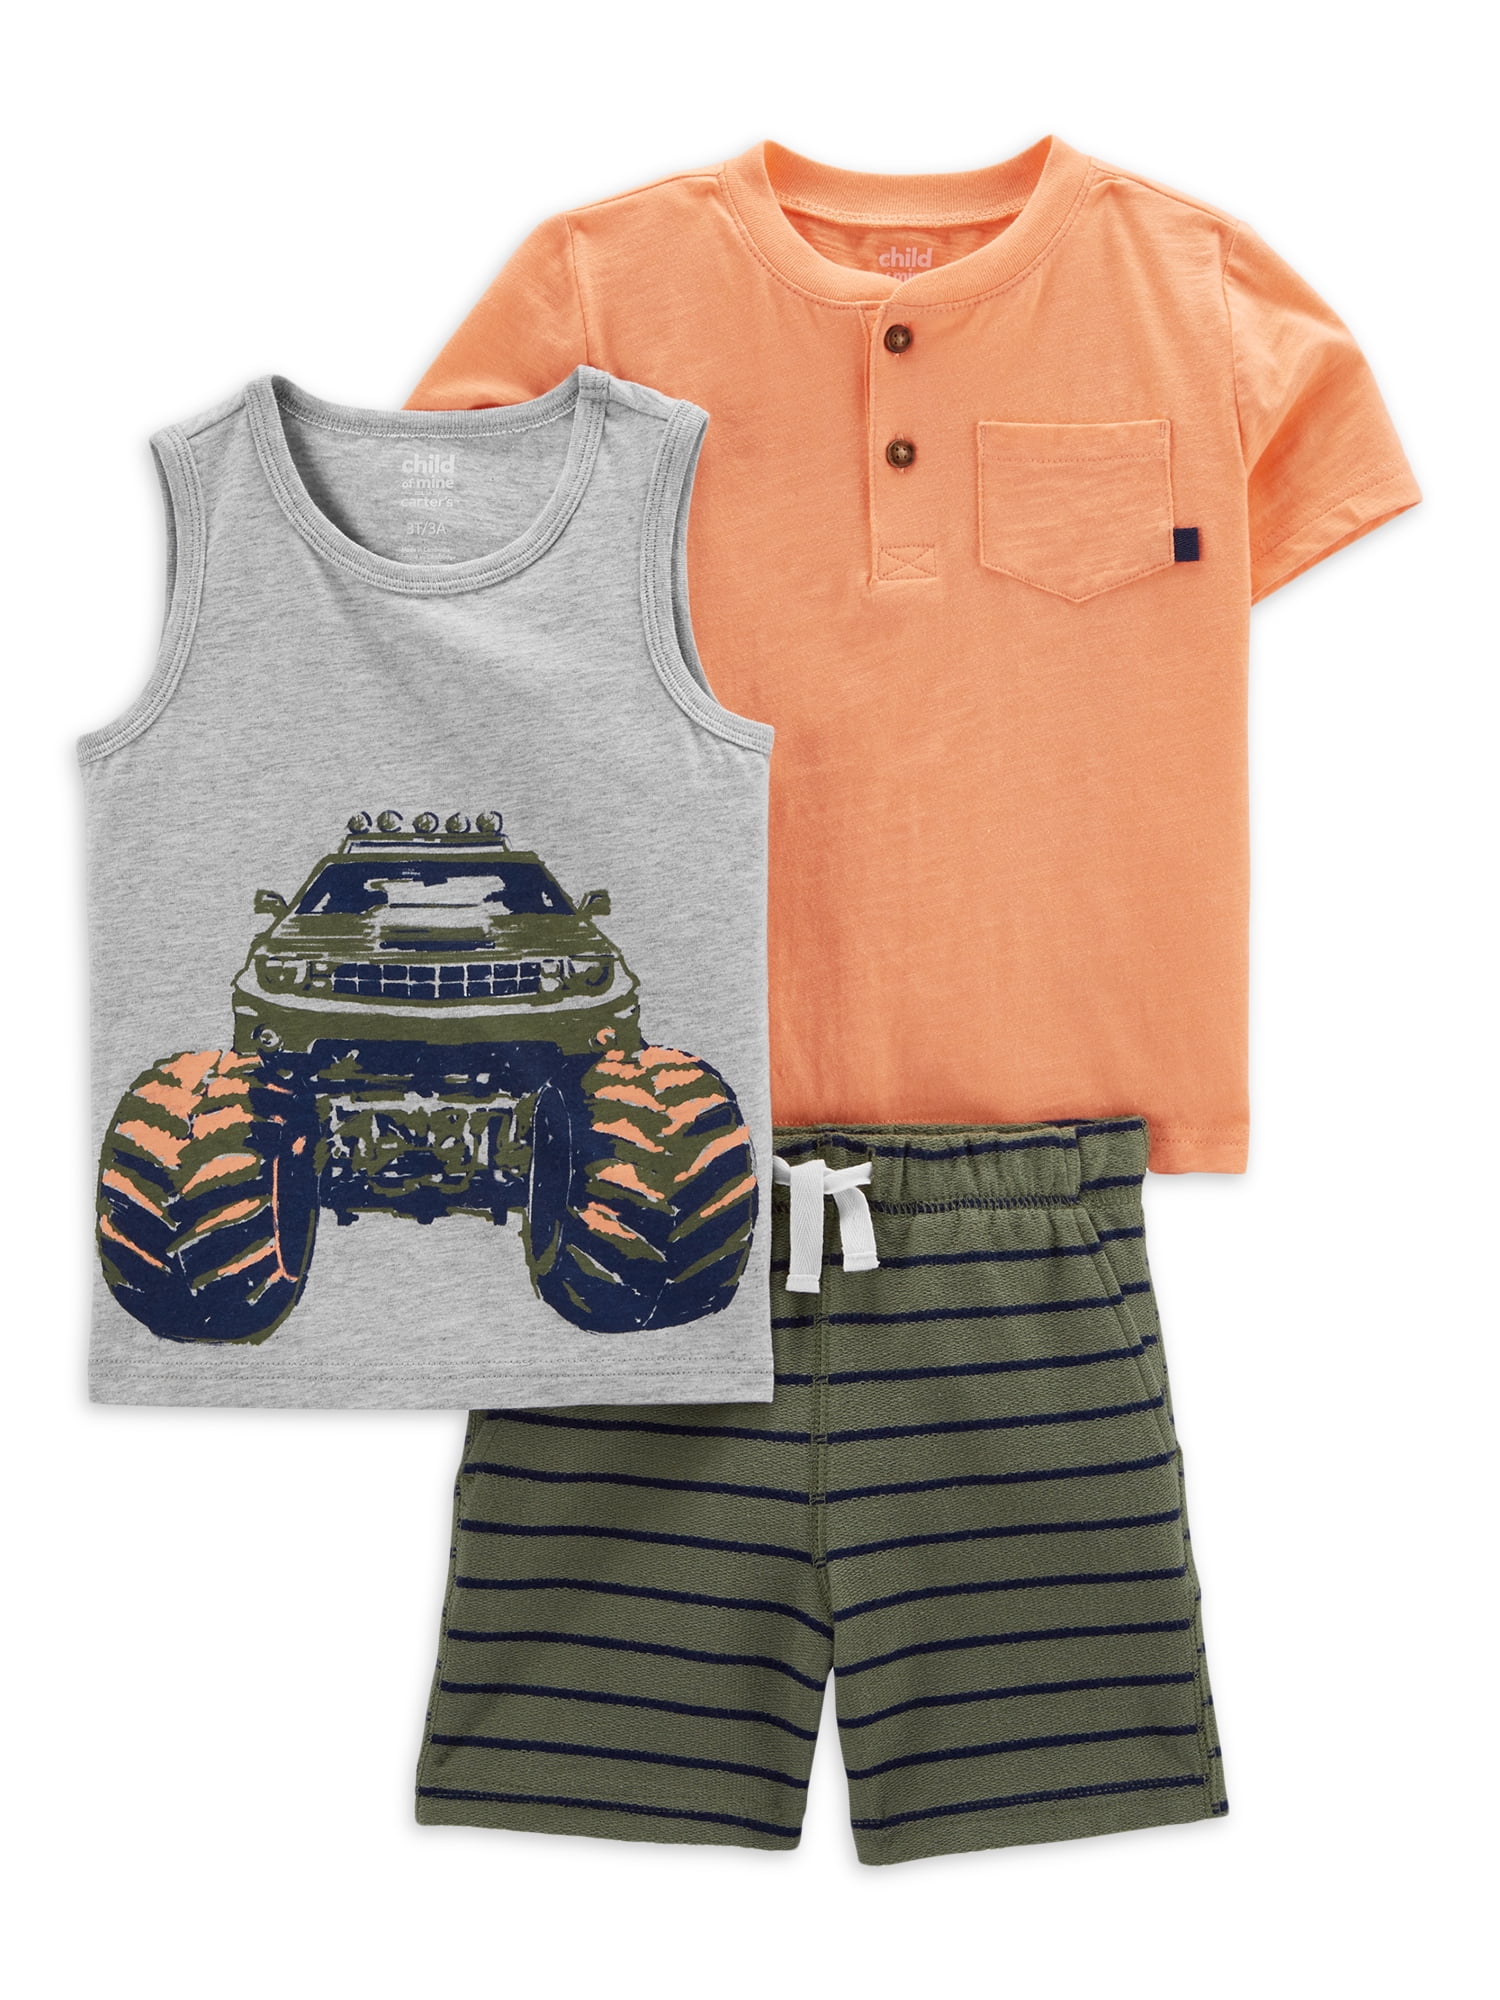 Toddler Boys Short Sleeve T-Shirt and Short Outfit Set 